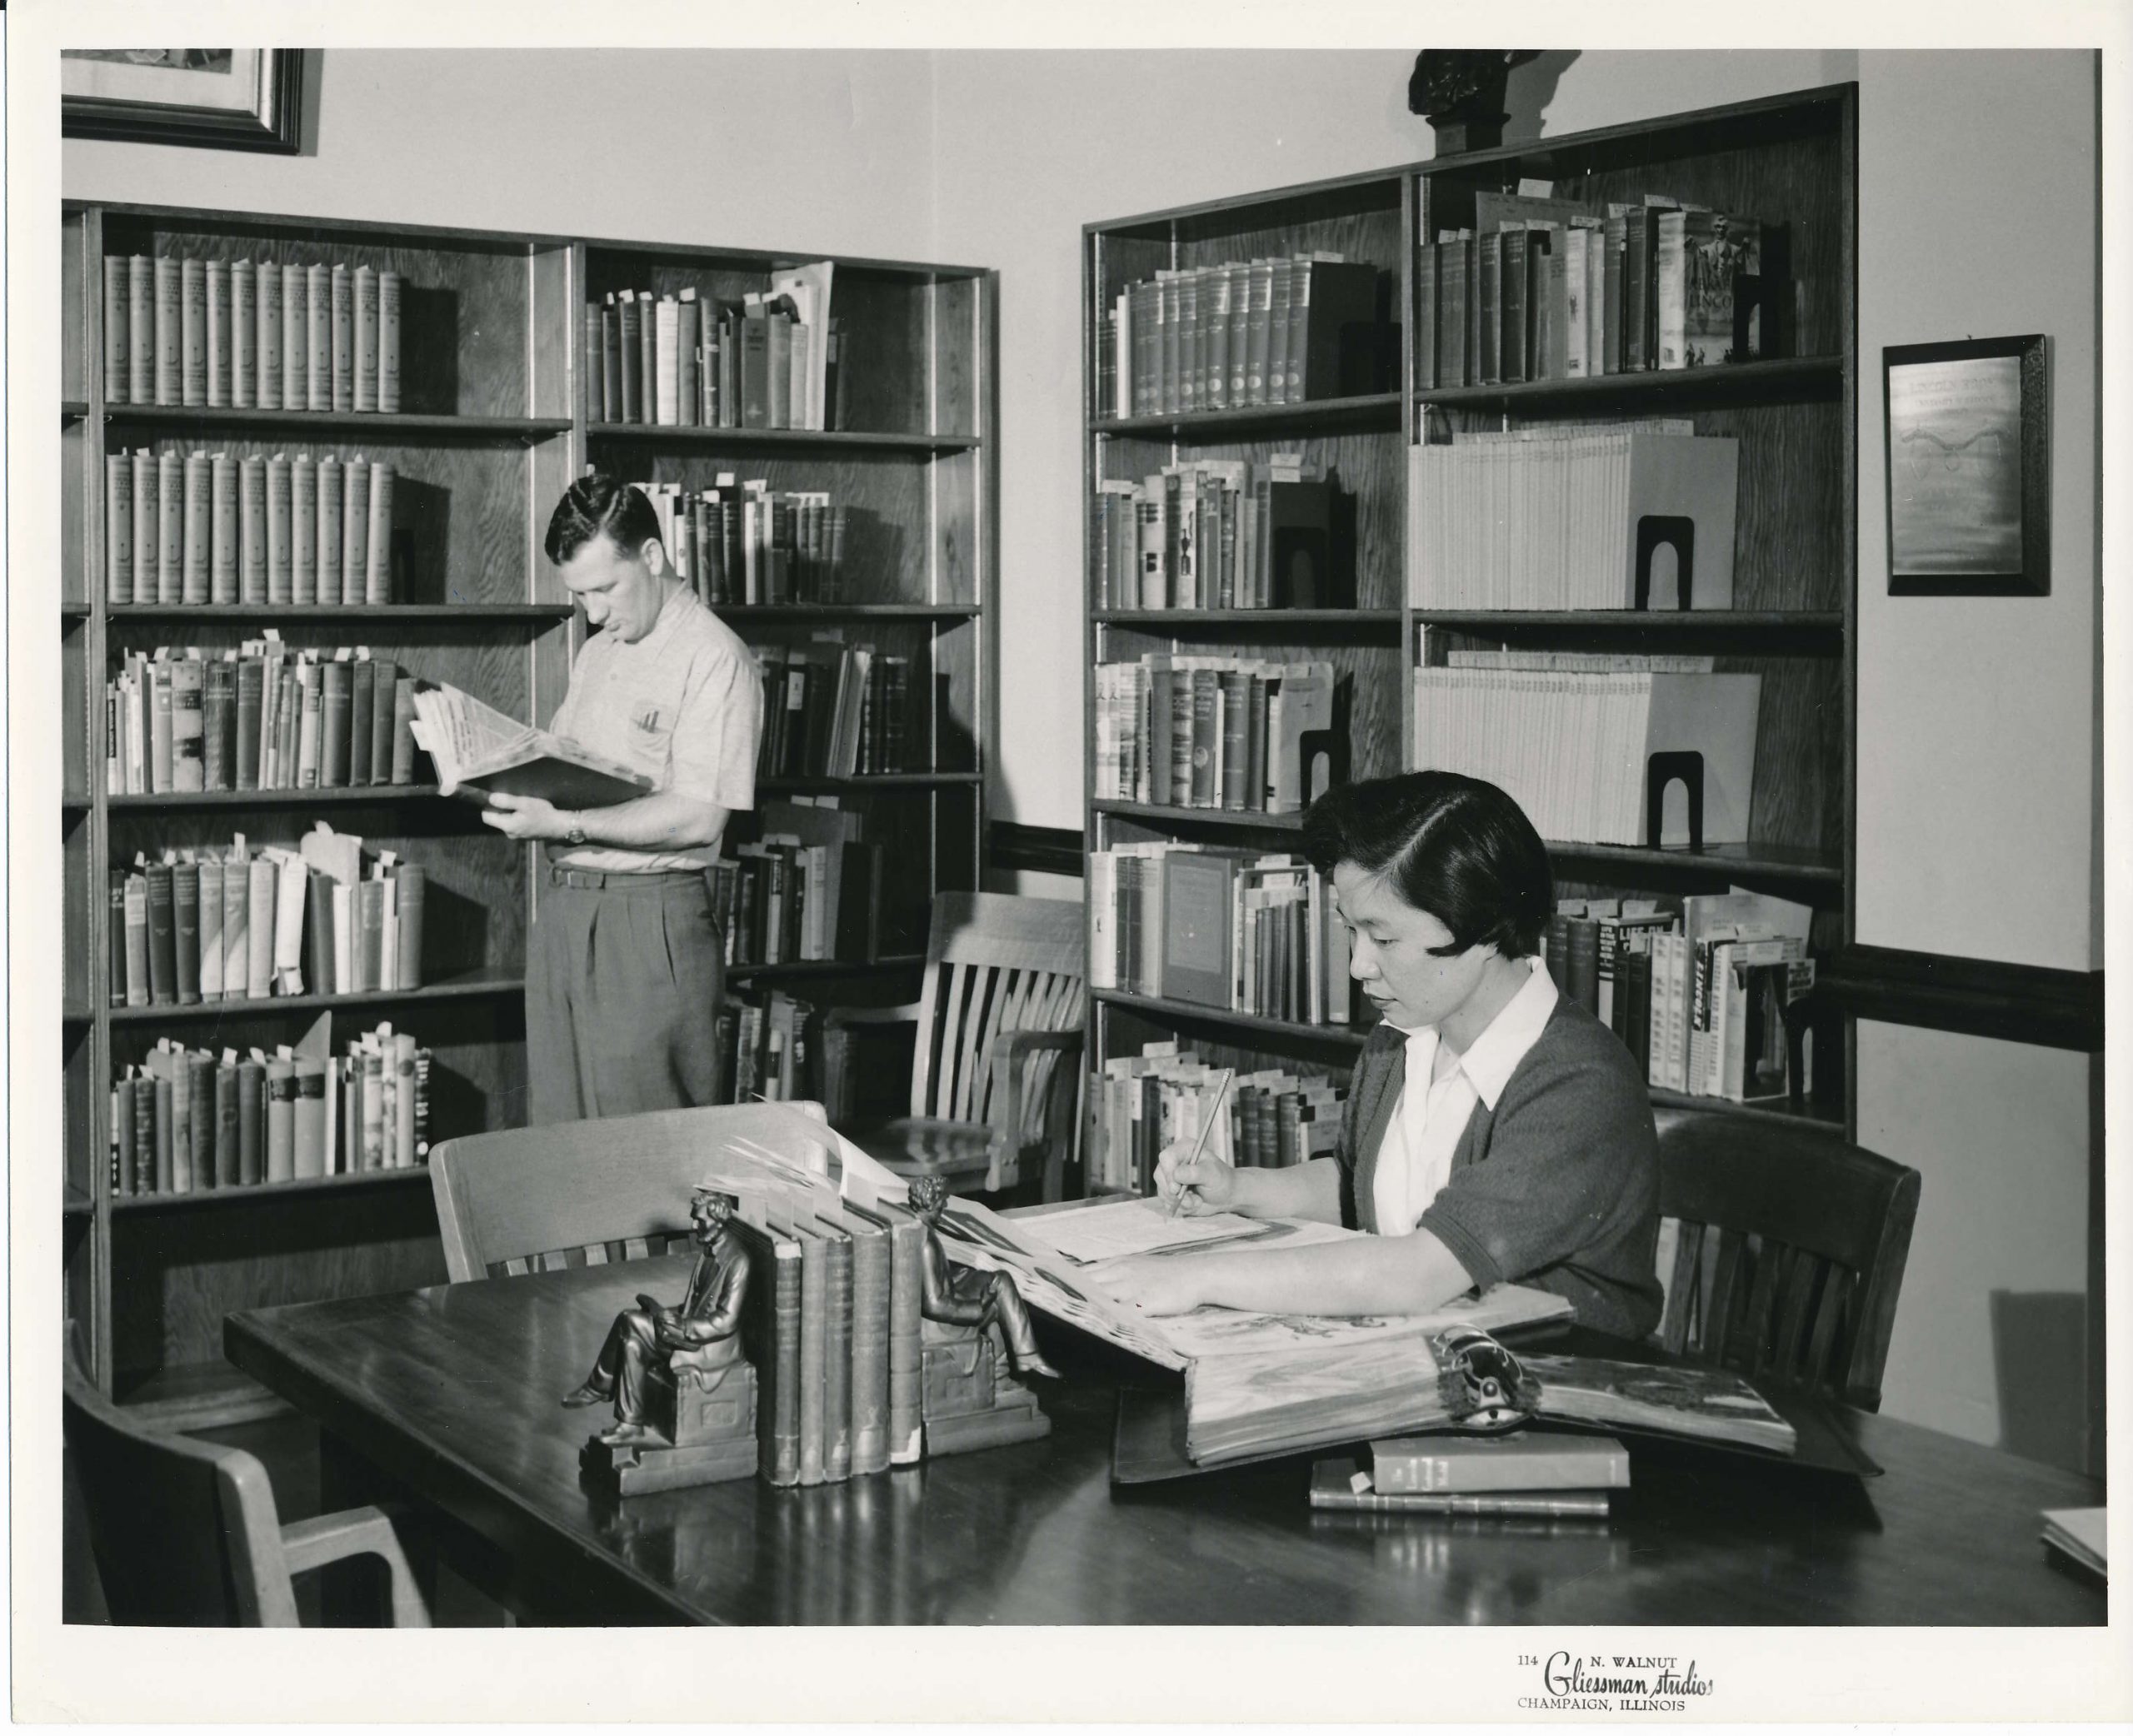 Researchers (one sitting, one standing, both reading books) use the Lincoln Room. Bookshelves line the walls. 